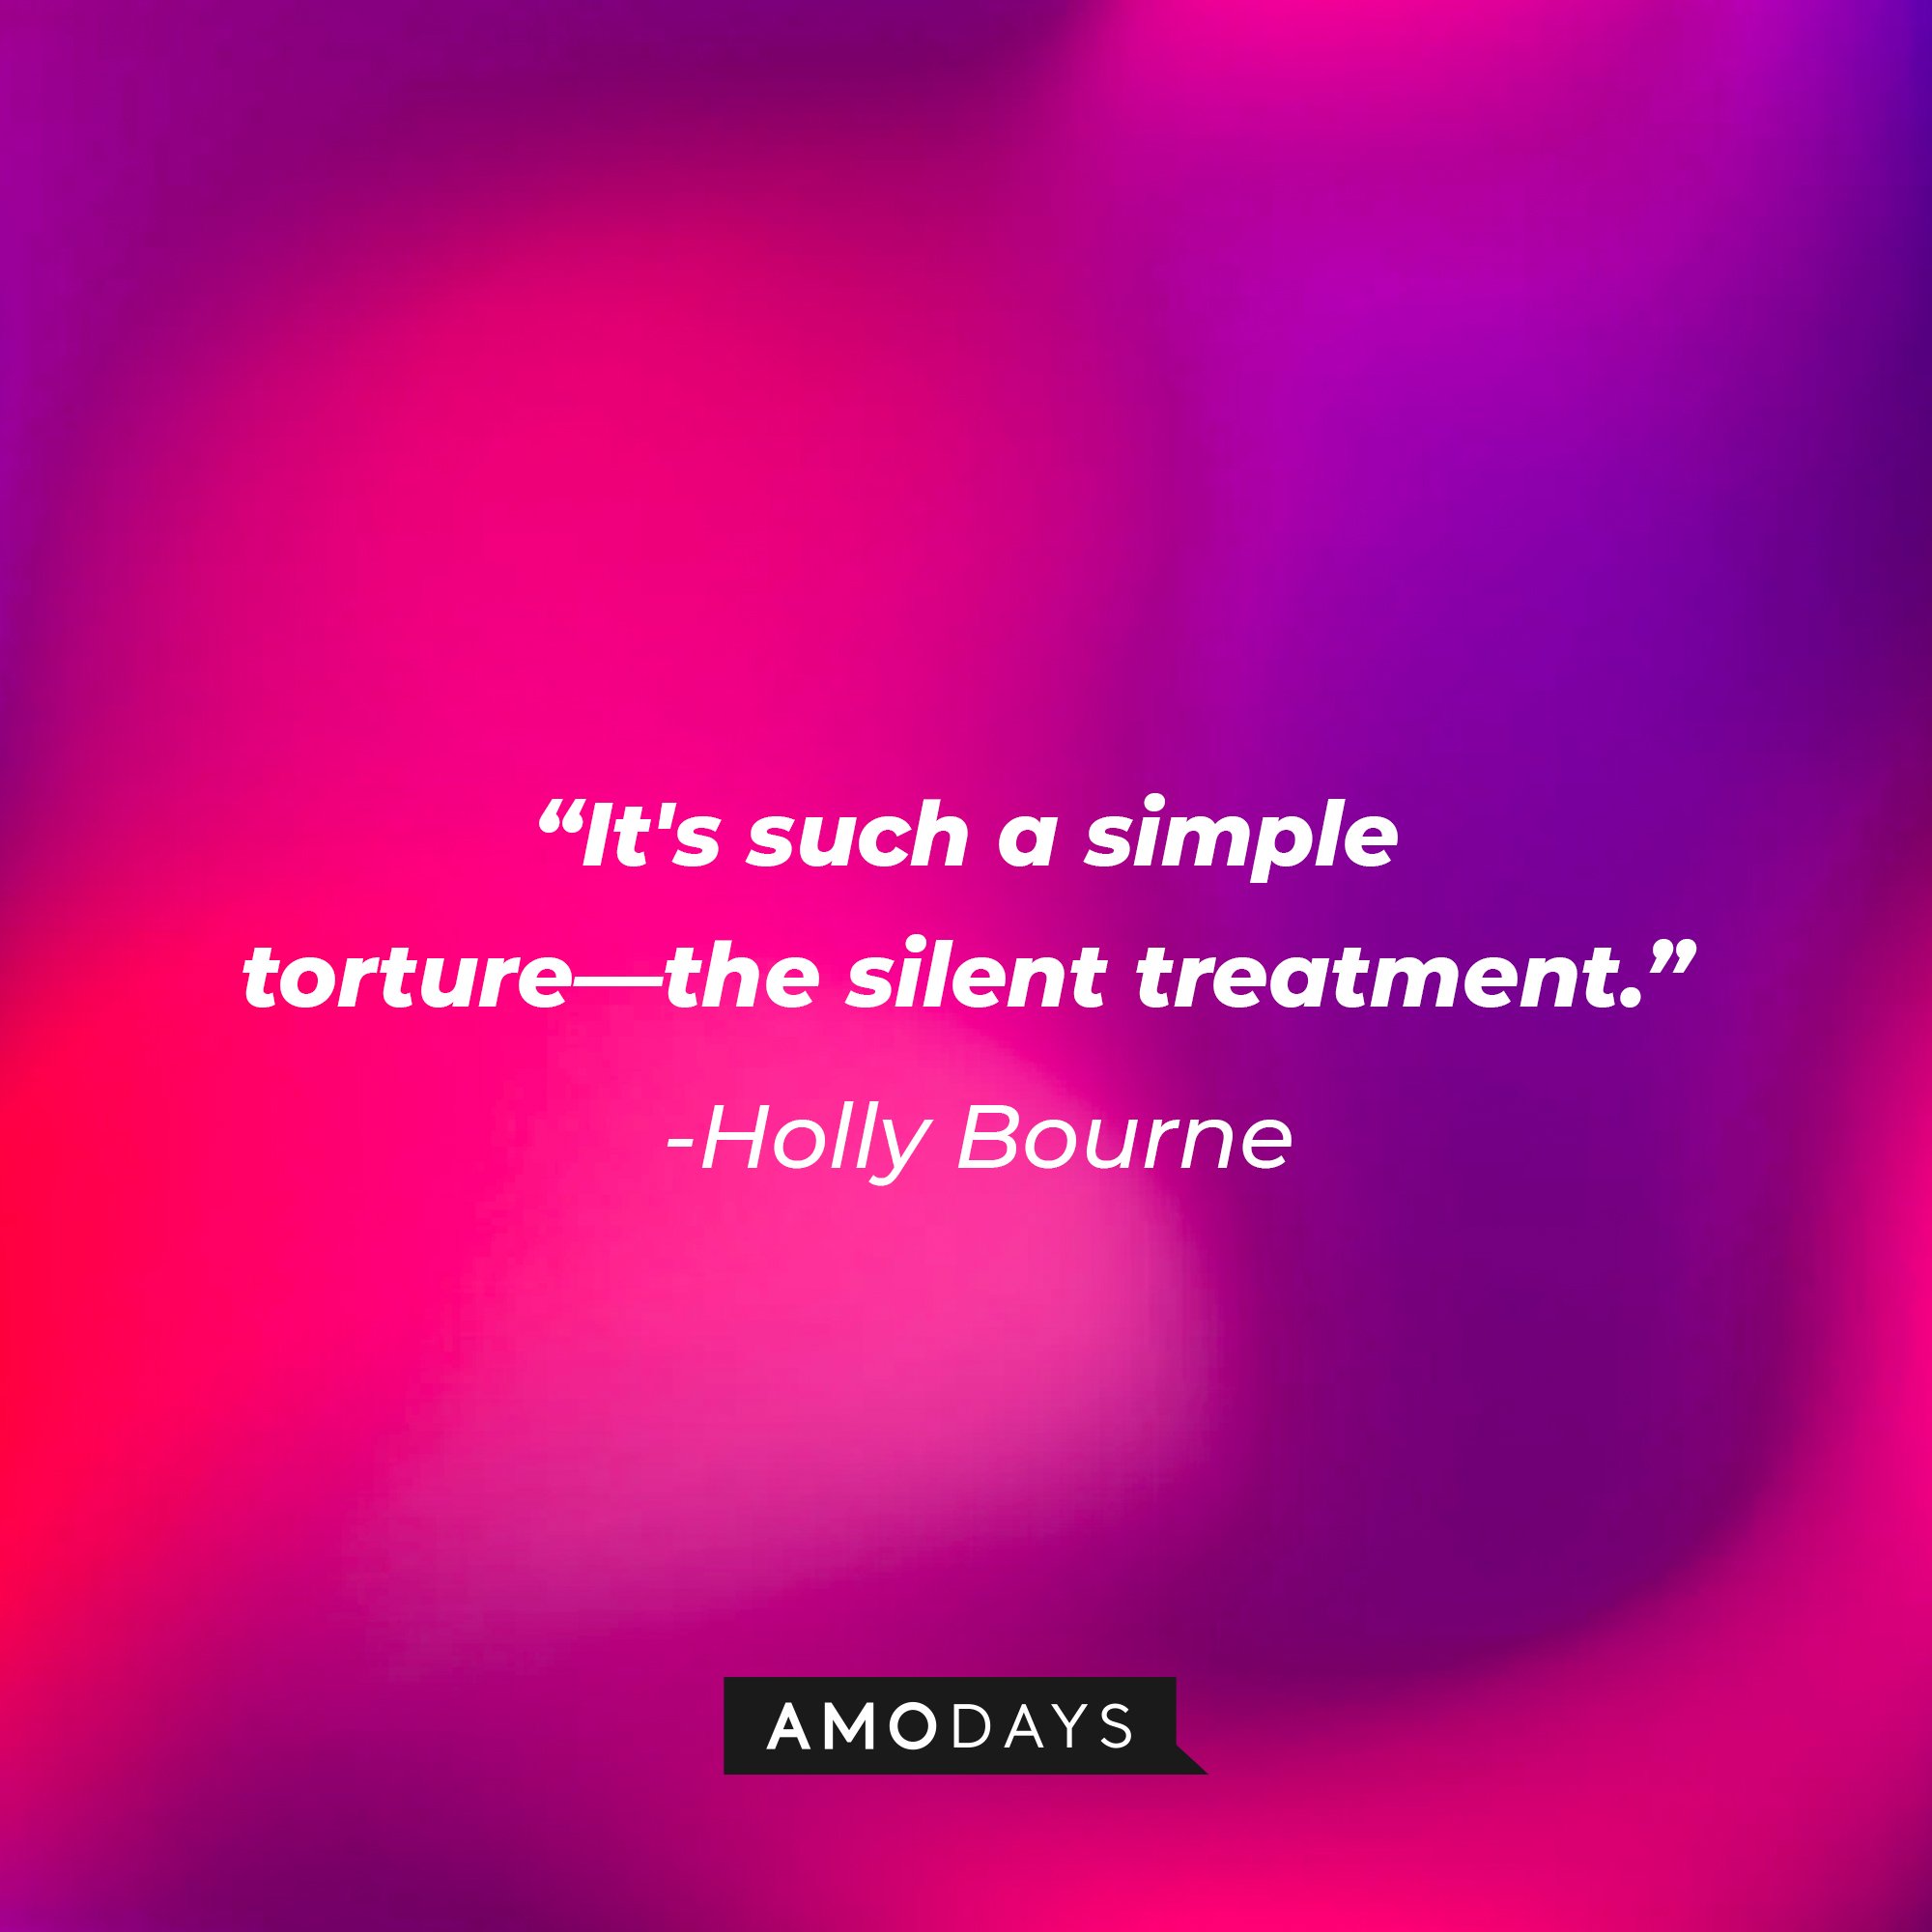 Holly Bourne's quote:\\\\u00a0"It's such a simple torture—the silent treatment."\\\\u00a0| Image: AmoDays